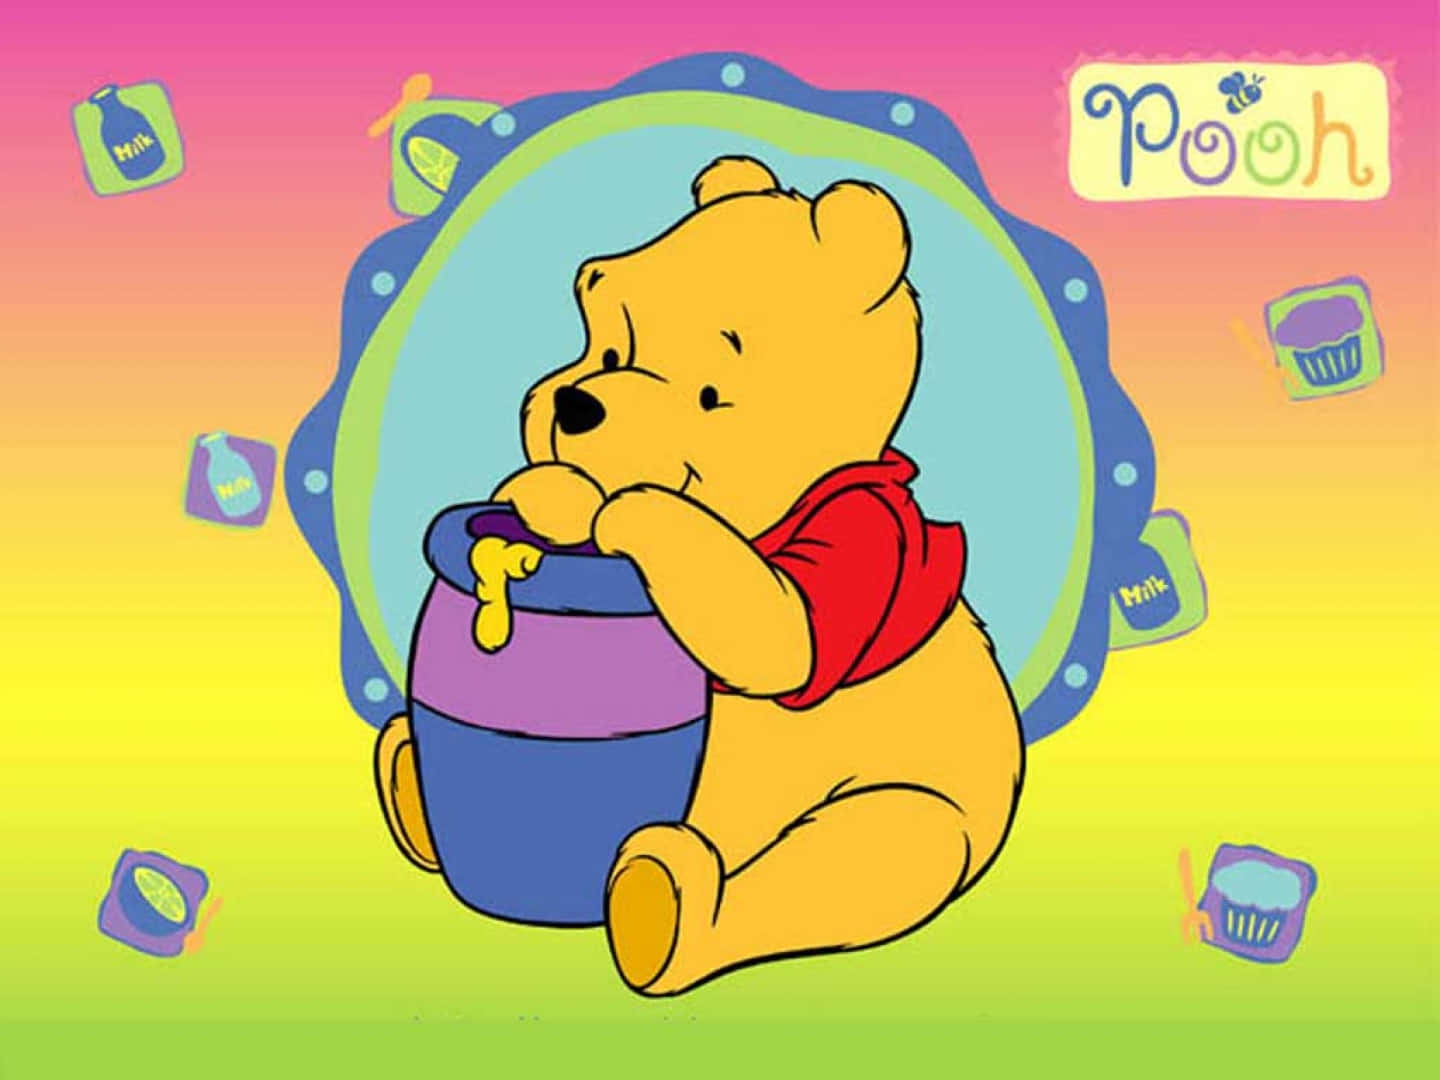 Celebrate the Magic of Friendship with Winnie the Pooh